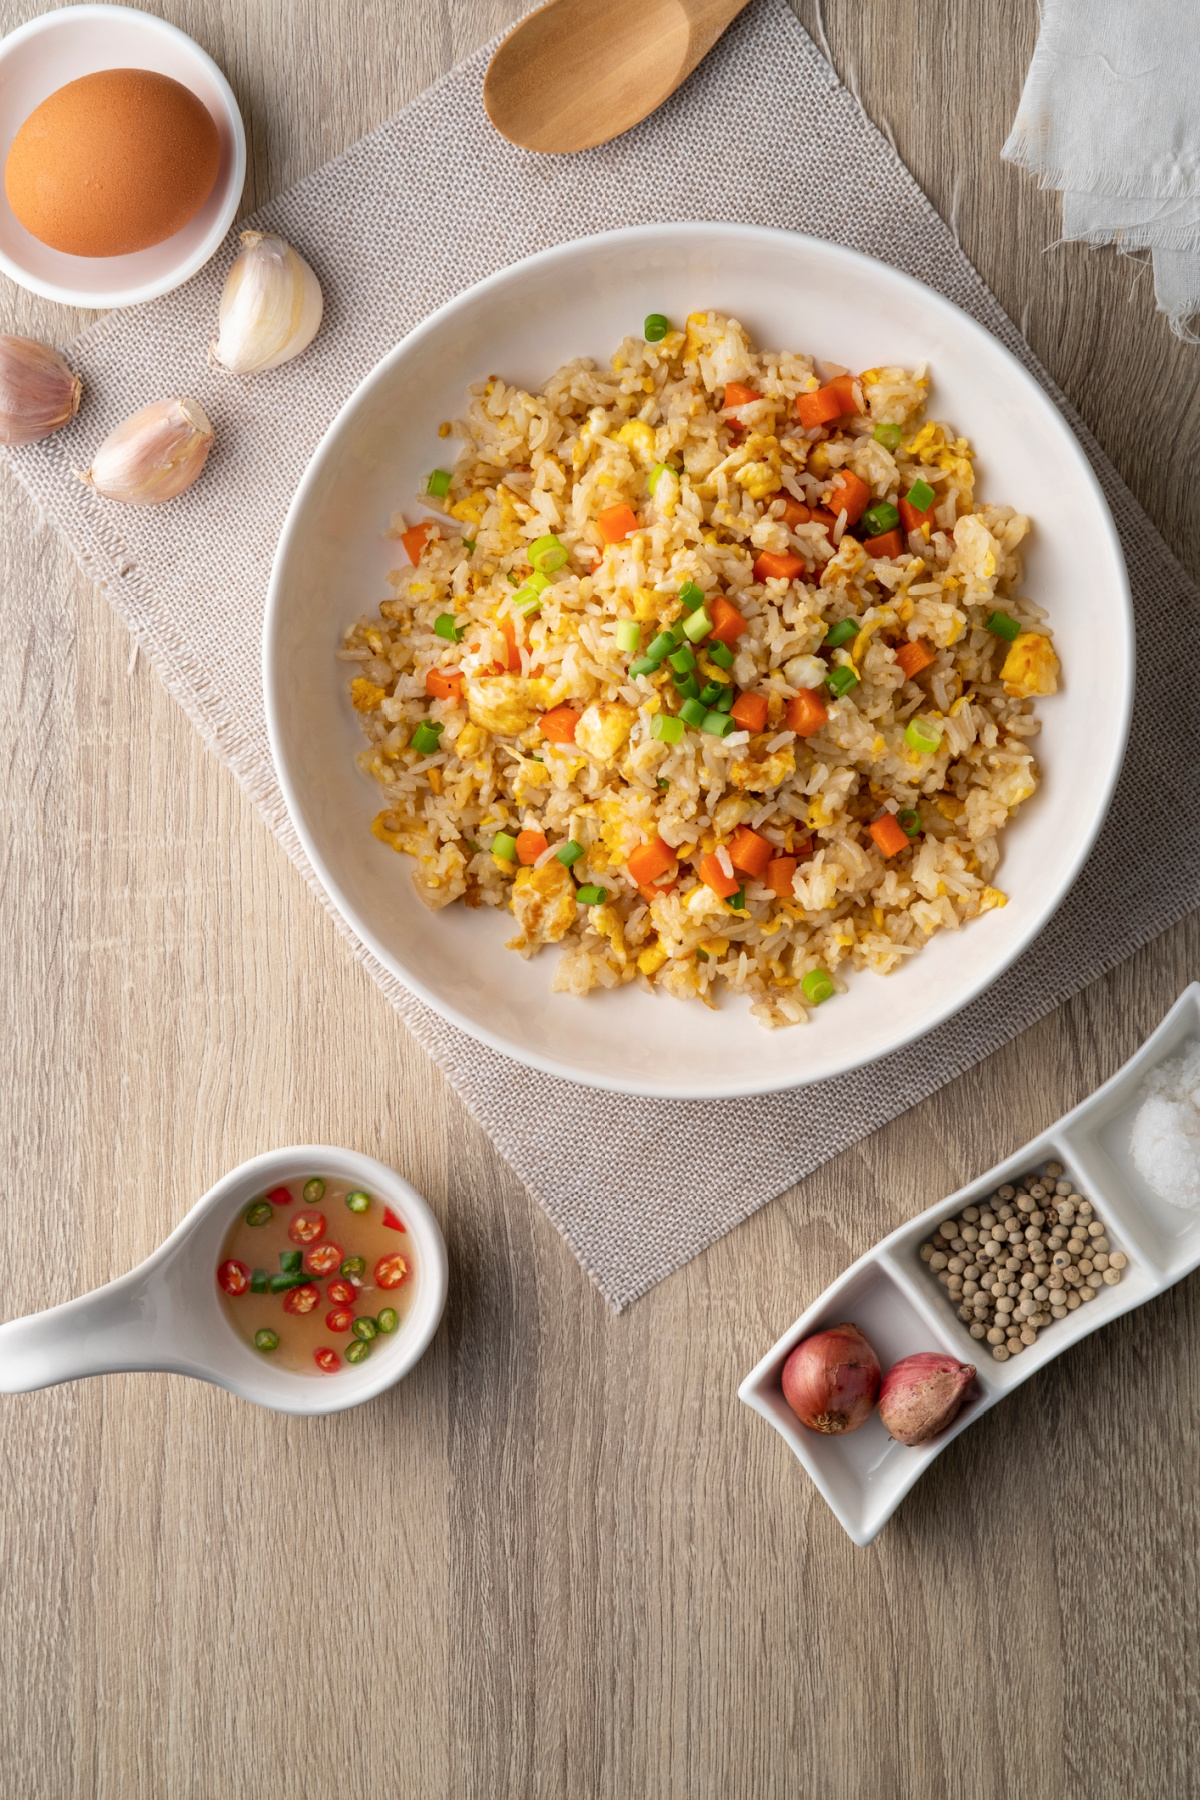 How to make a healthier version of Chinese Fried Rice at home